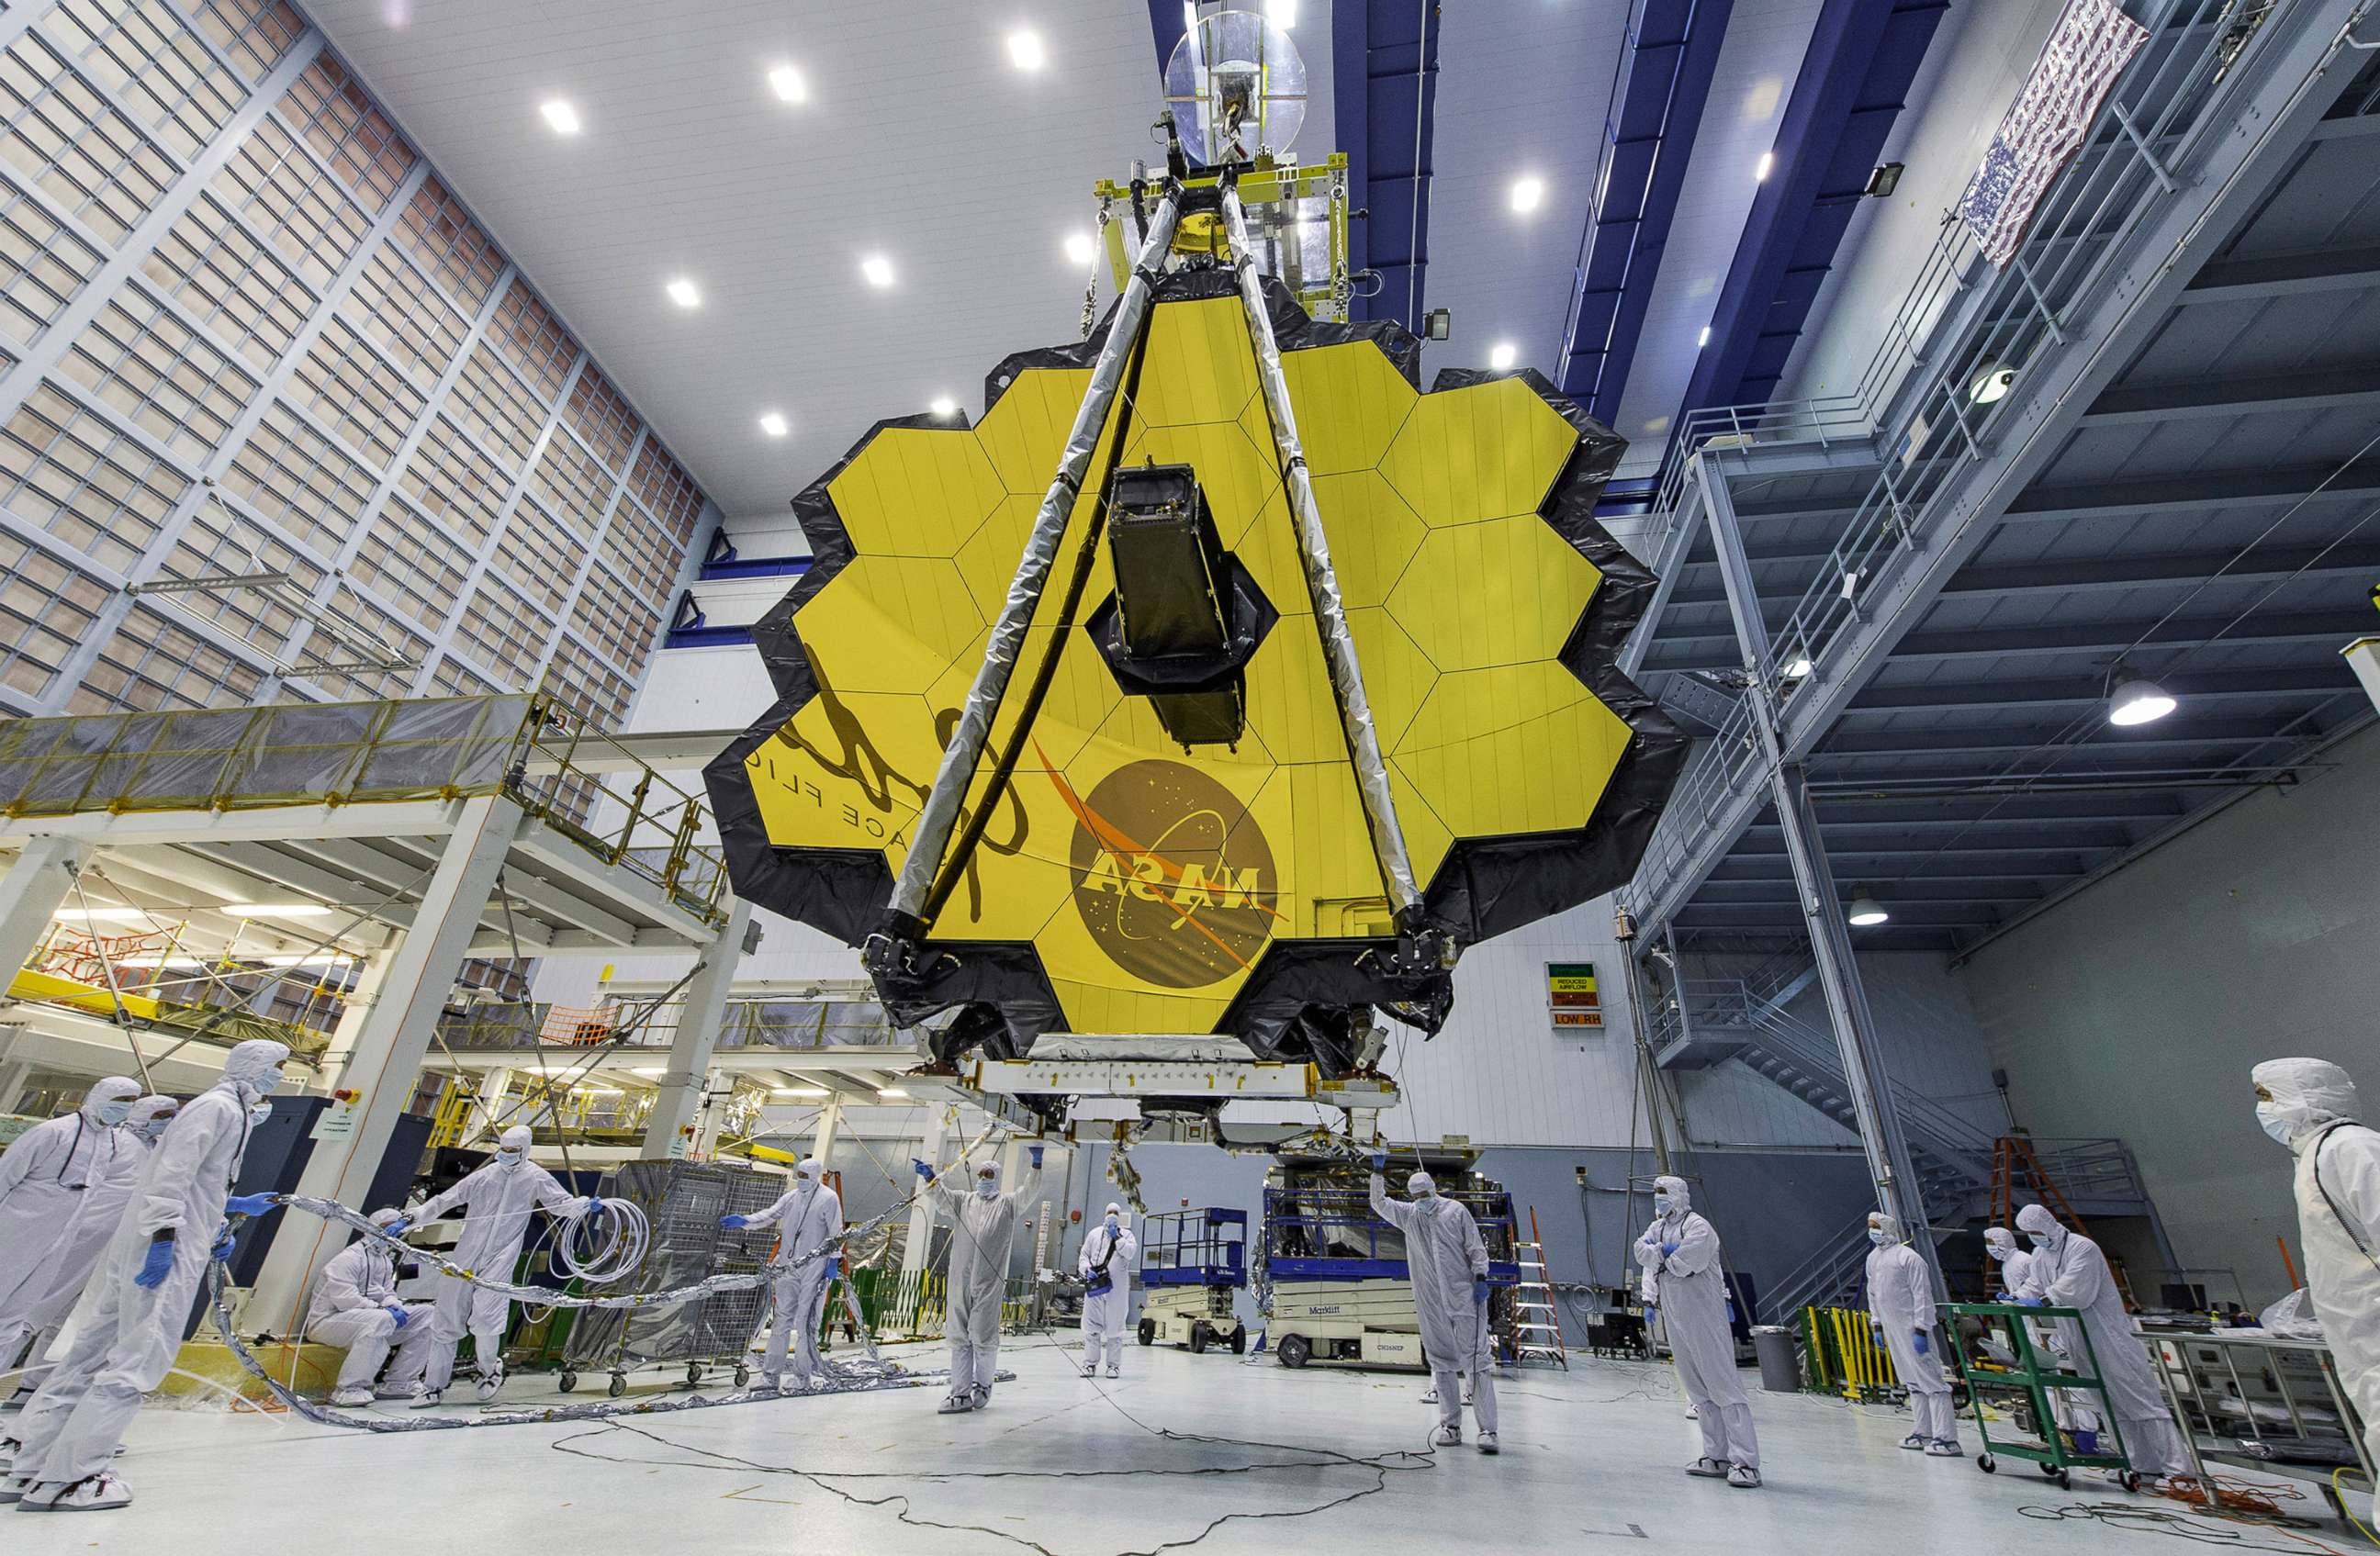 PHOTO: Technicians lift the mirror of the James Webb Space Telescope using a crane at the Goddard Space Flight Center in Greenbelt, Md., on April 13, 2017, in this photo provided by NASA.